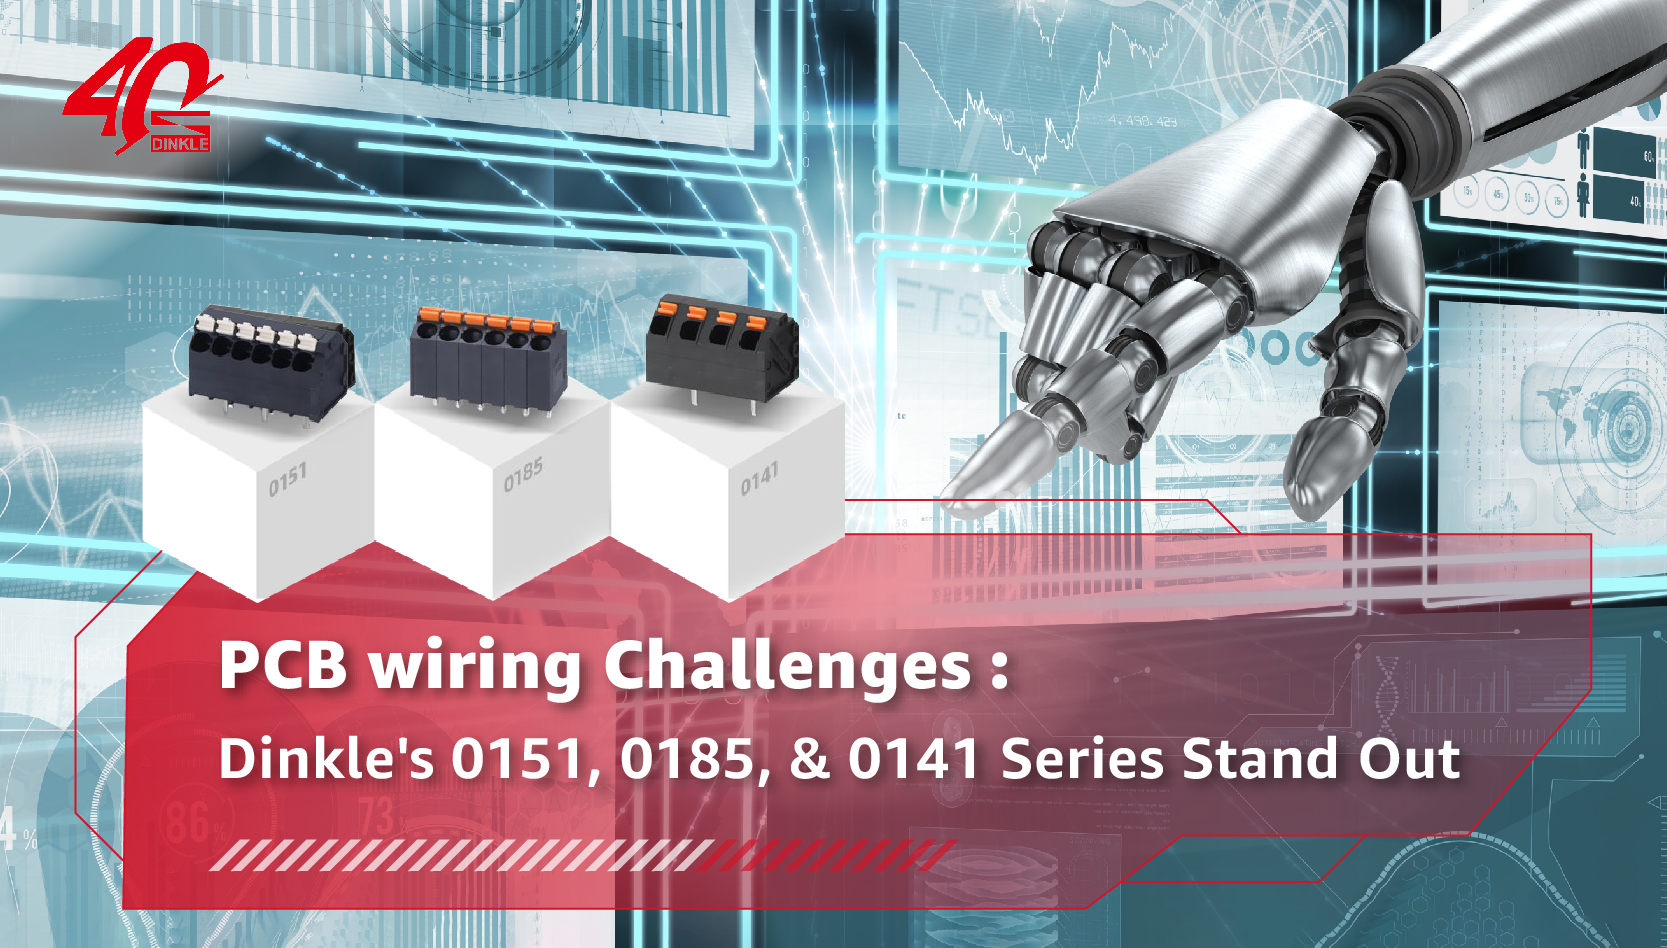 PCB wiring Challenges: Dinkle's 0151, 0185, & 0141 Series Stand Out